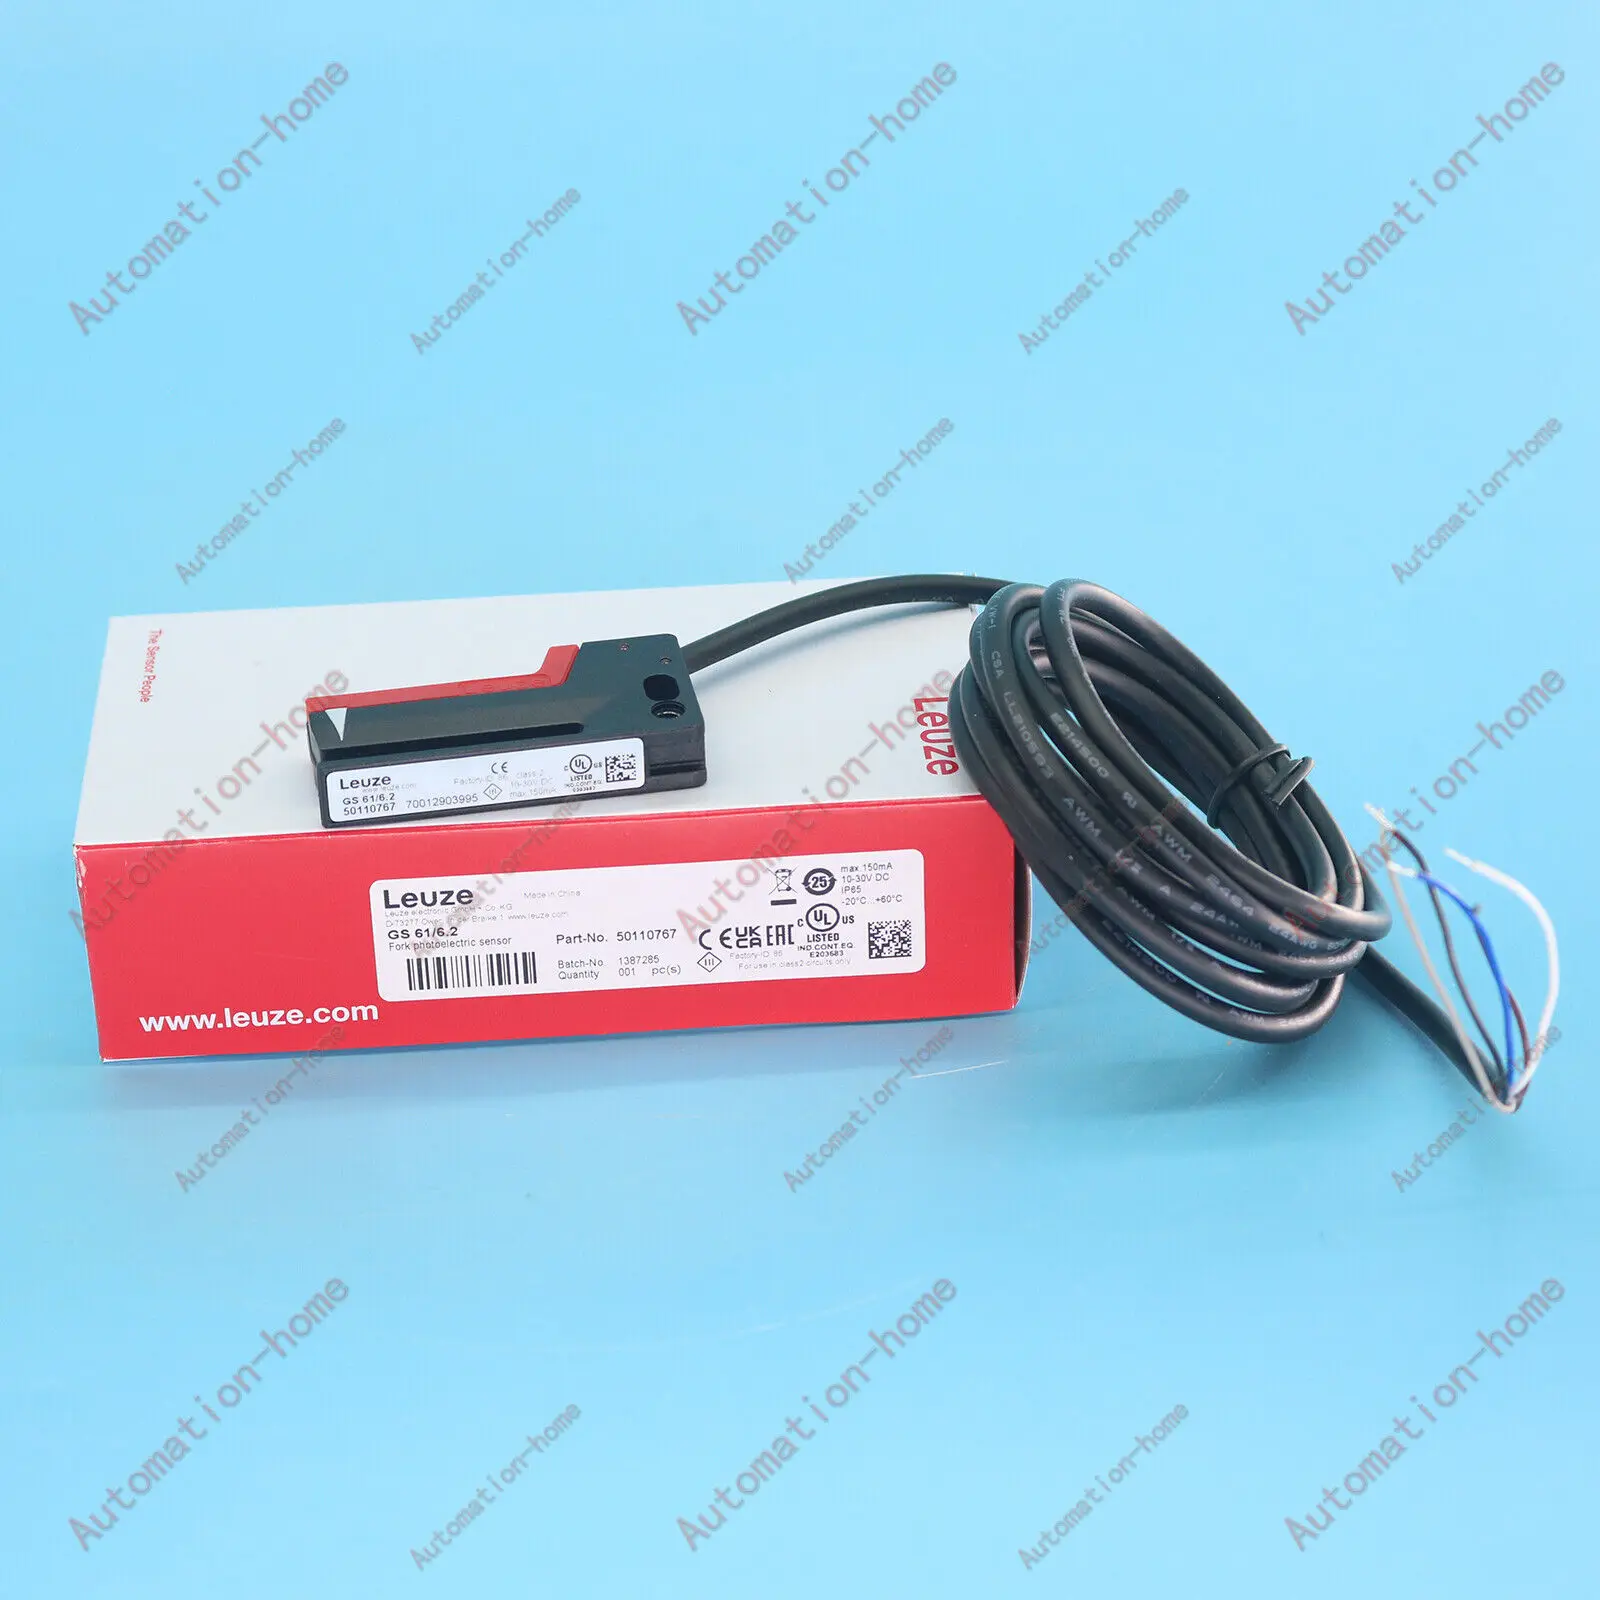 

1PC New For Leuze GS 61/6.2 photoelectric switch In Box Free Shipping#QW